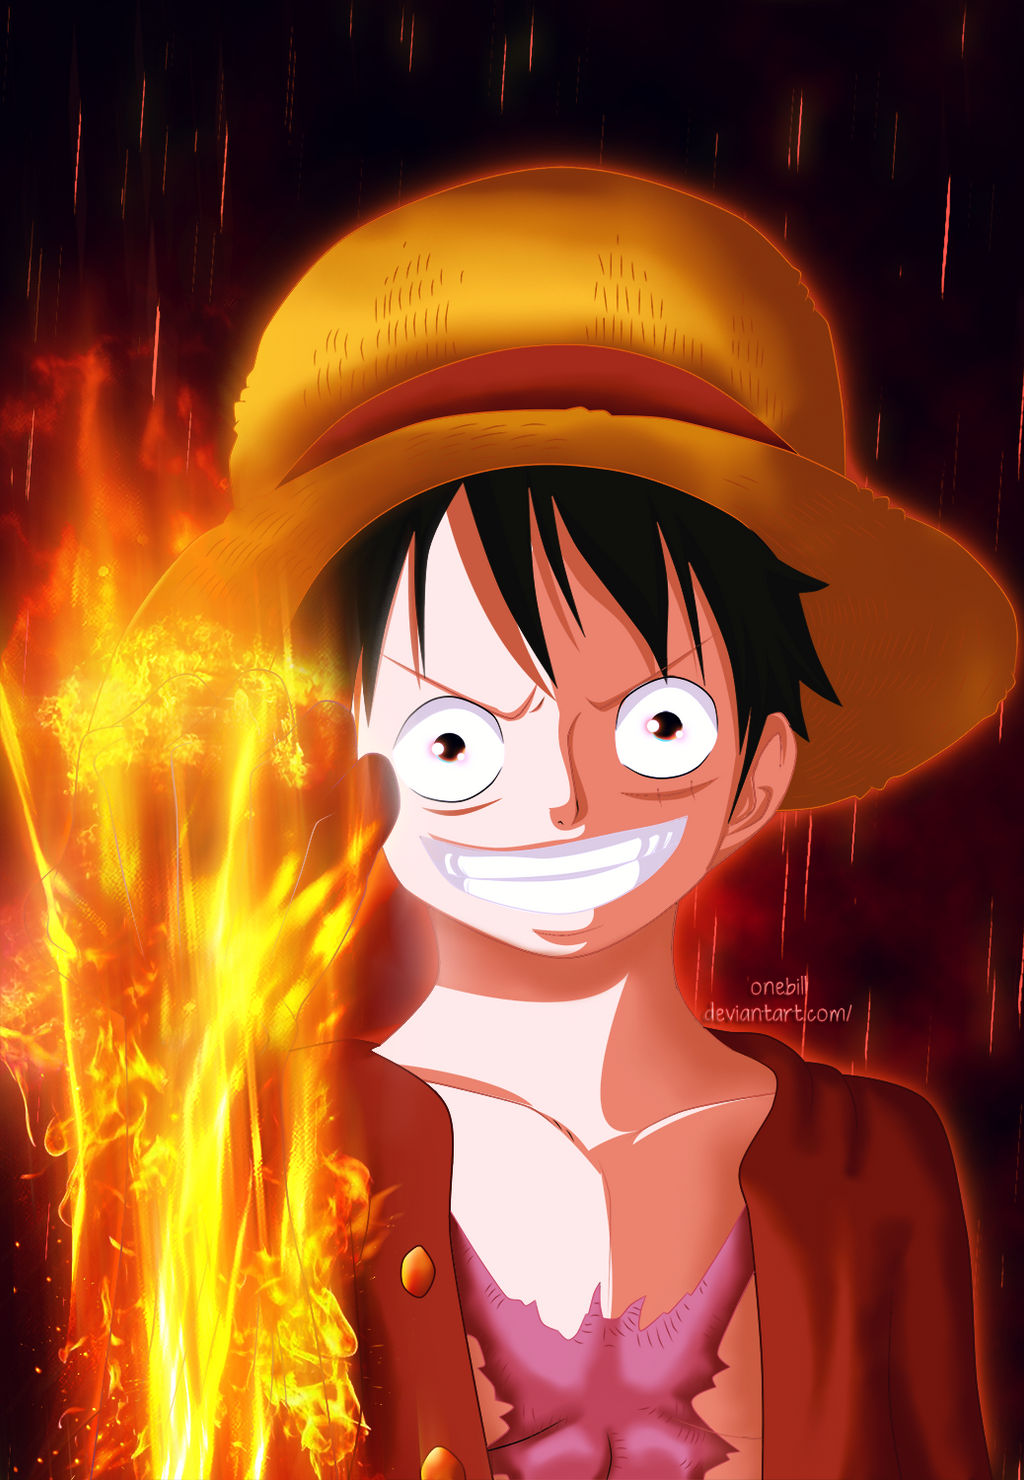 One Piece 699 Red Hawk Cover Update By Onebill On Deviantart